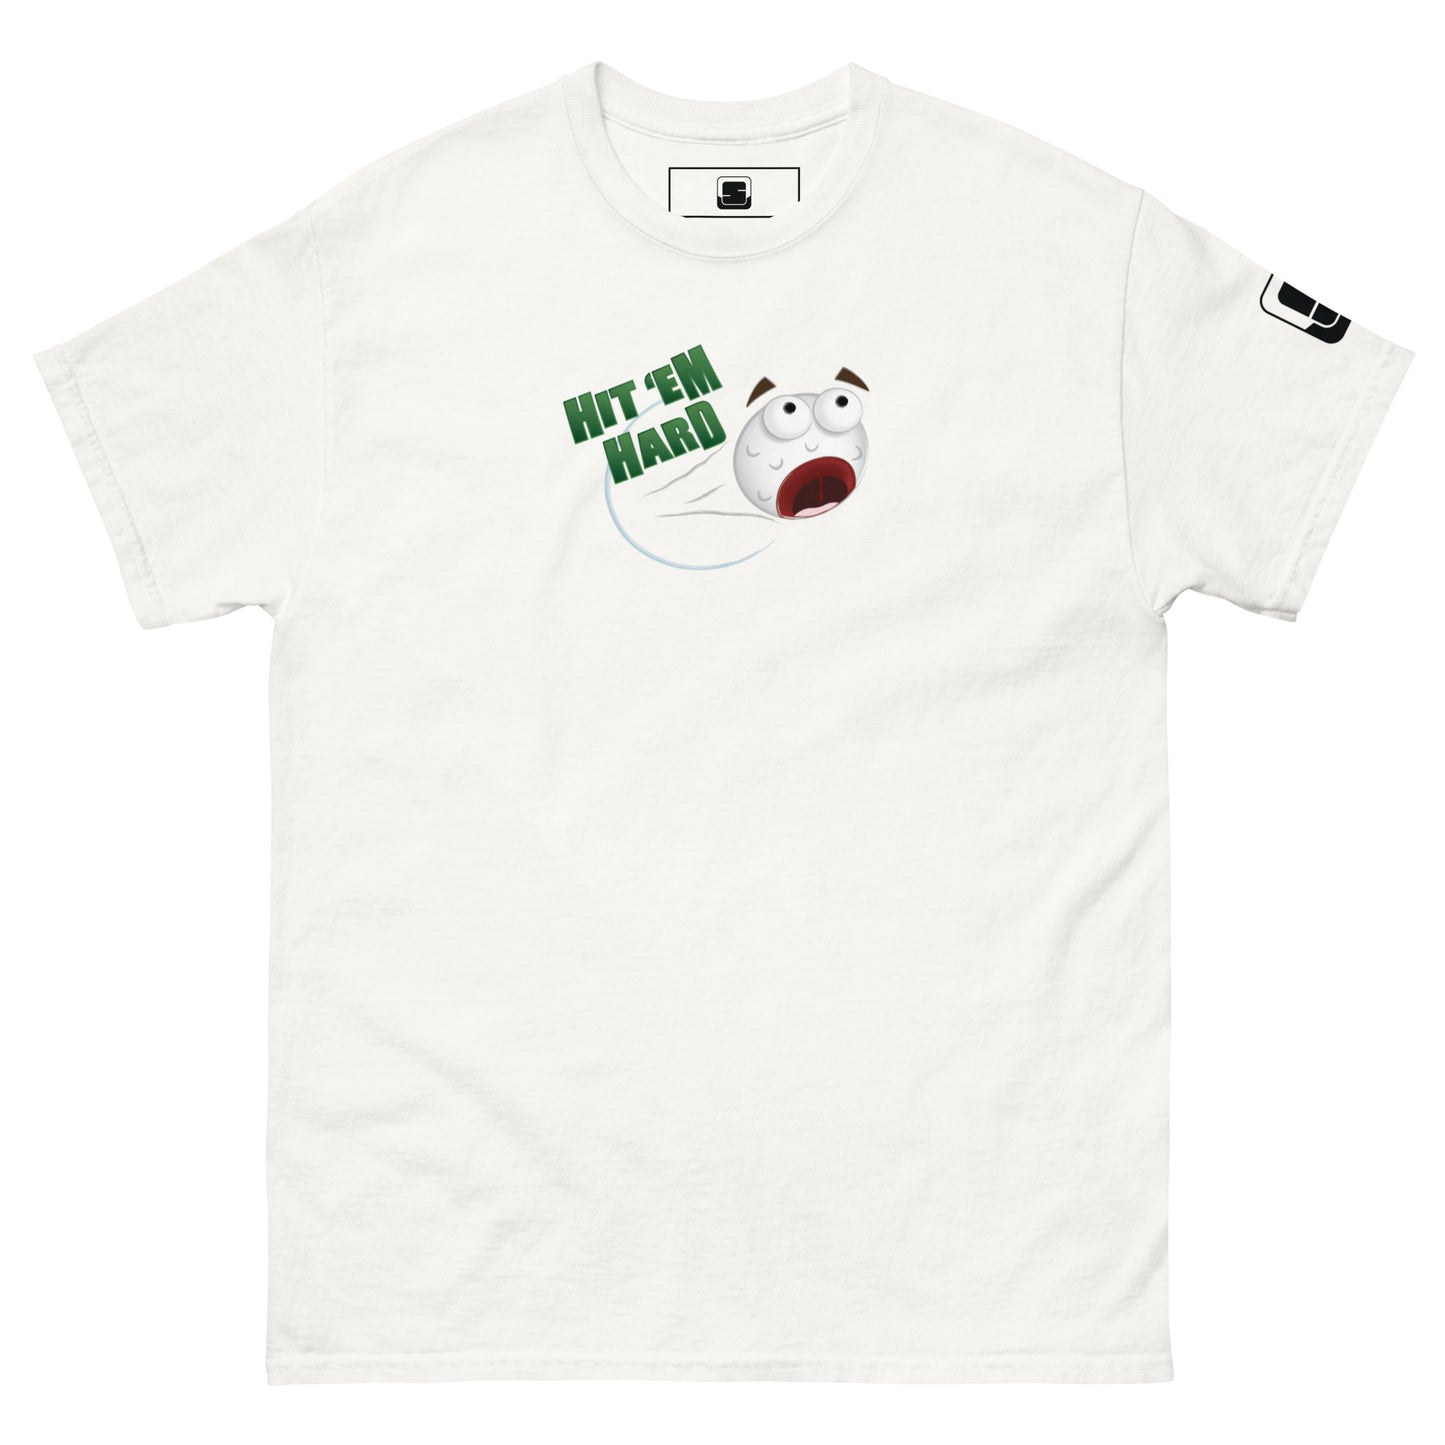  A white t-shirt is laid flat, featuring a colorful graphic in the center. The graphic depicts a distressed cartoon golf ball with wide eyes and an open mouth, flying through the air. Above the golf ball, the phrase "HIT 'EM HARD" is printed in bold, green letters. The golf ball leaves a streak behind it, emphasizing its high speed. The right sleeve has a small white logo patch. The bold graphic stands out against the black background, creating a fun and energetic design.